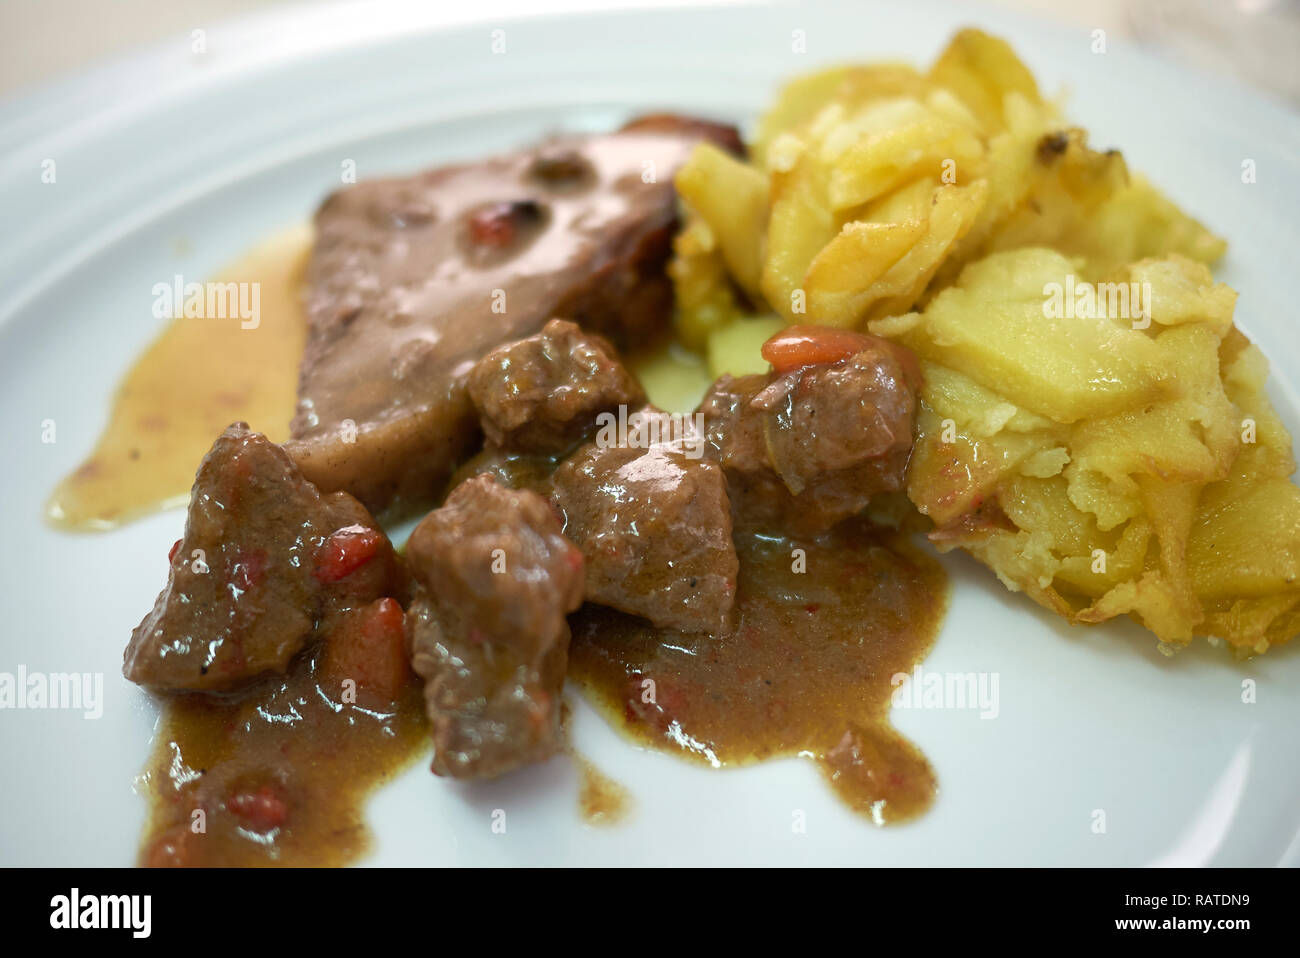 Roasted podolica meat with roasted potatoes Stock Photo